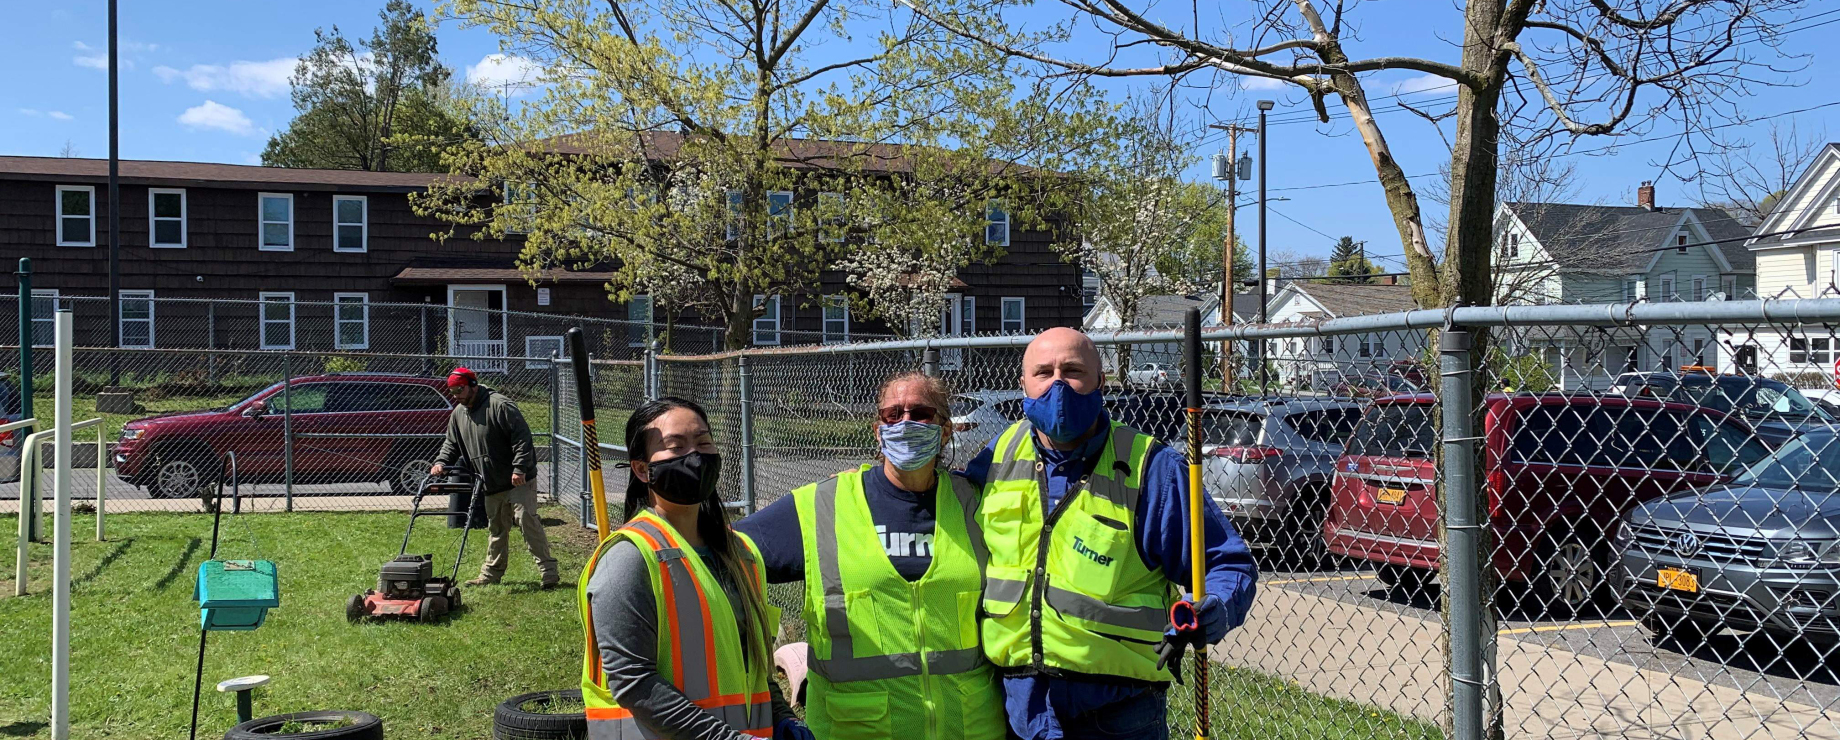 Earth Day Clean Up at Local Schools